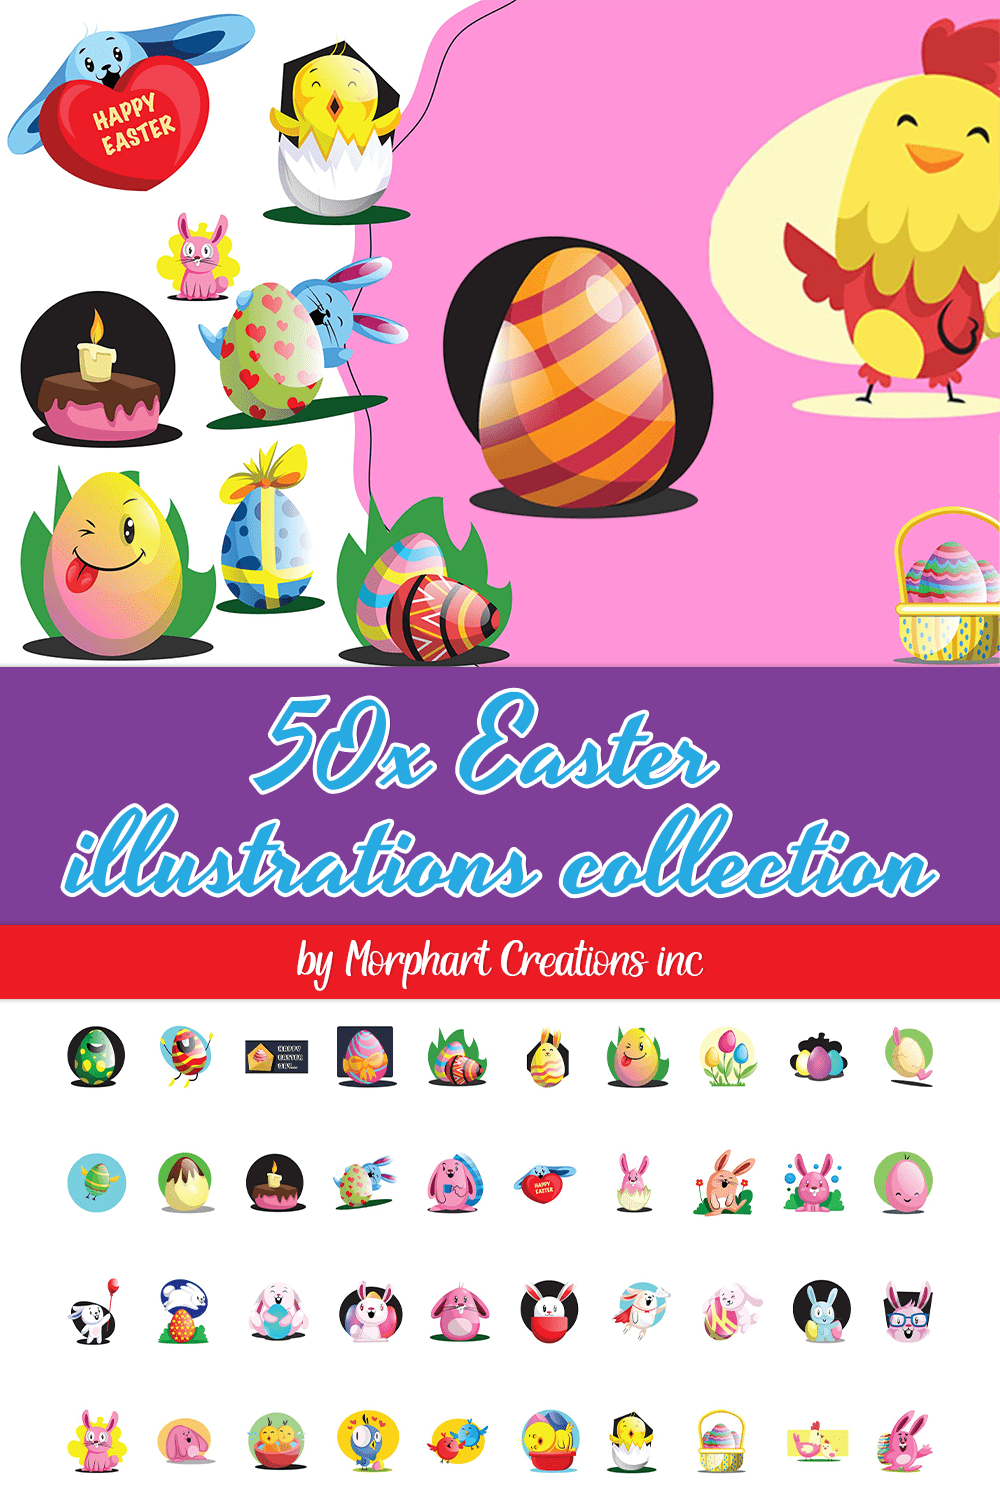 Collection of wonderful Easter images.